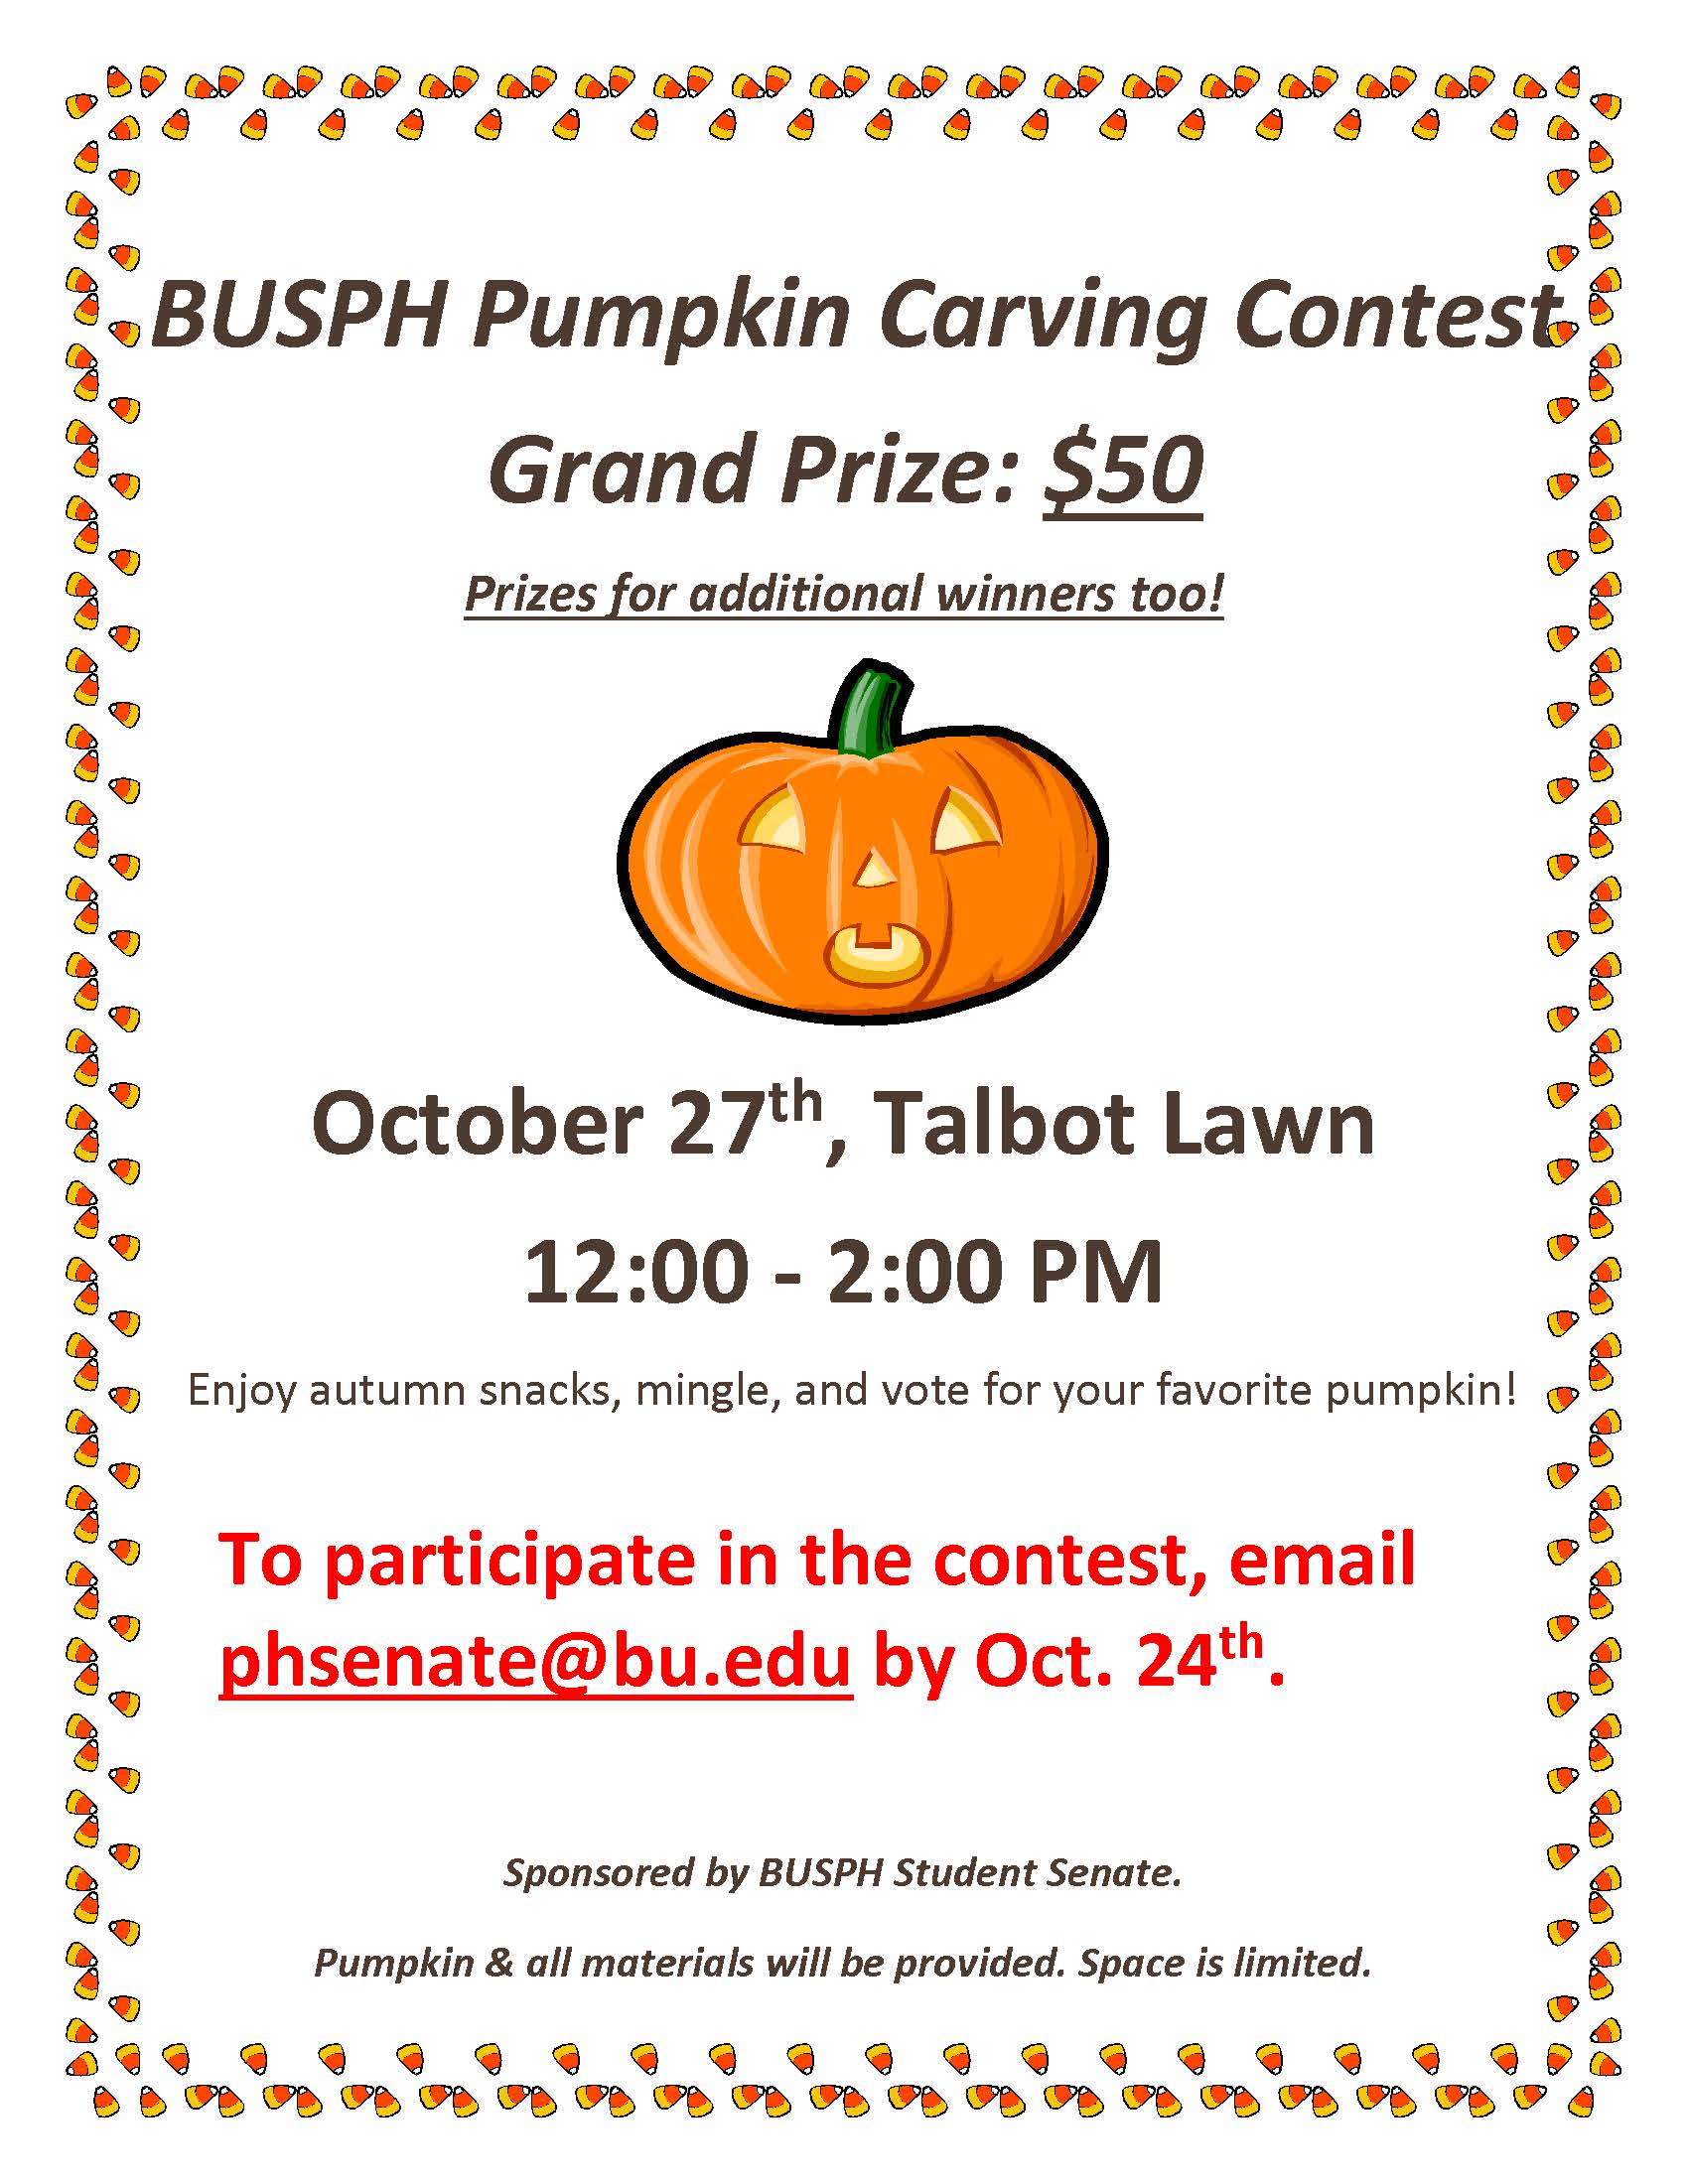 busph-pumpkin-carving-contest-oct-27th-on-talbot-green-sph